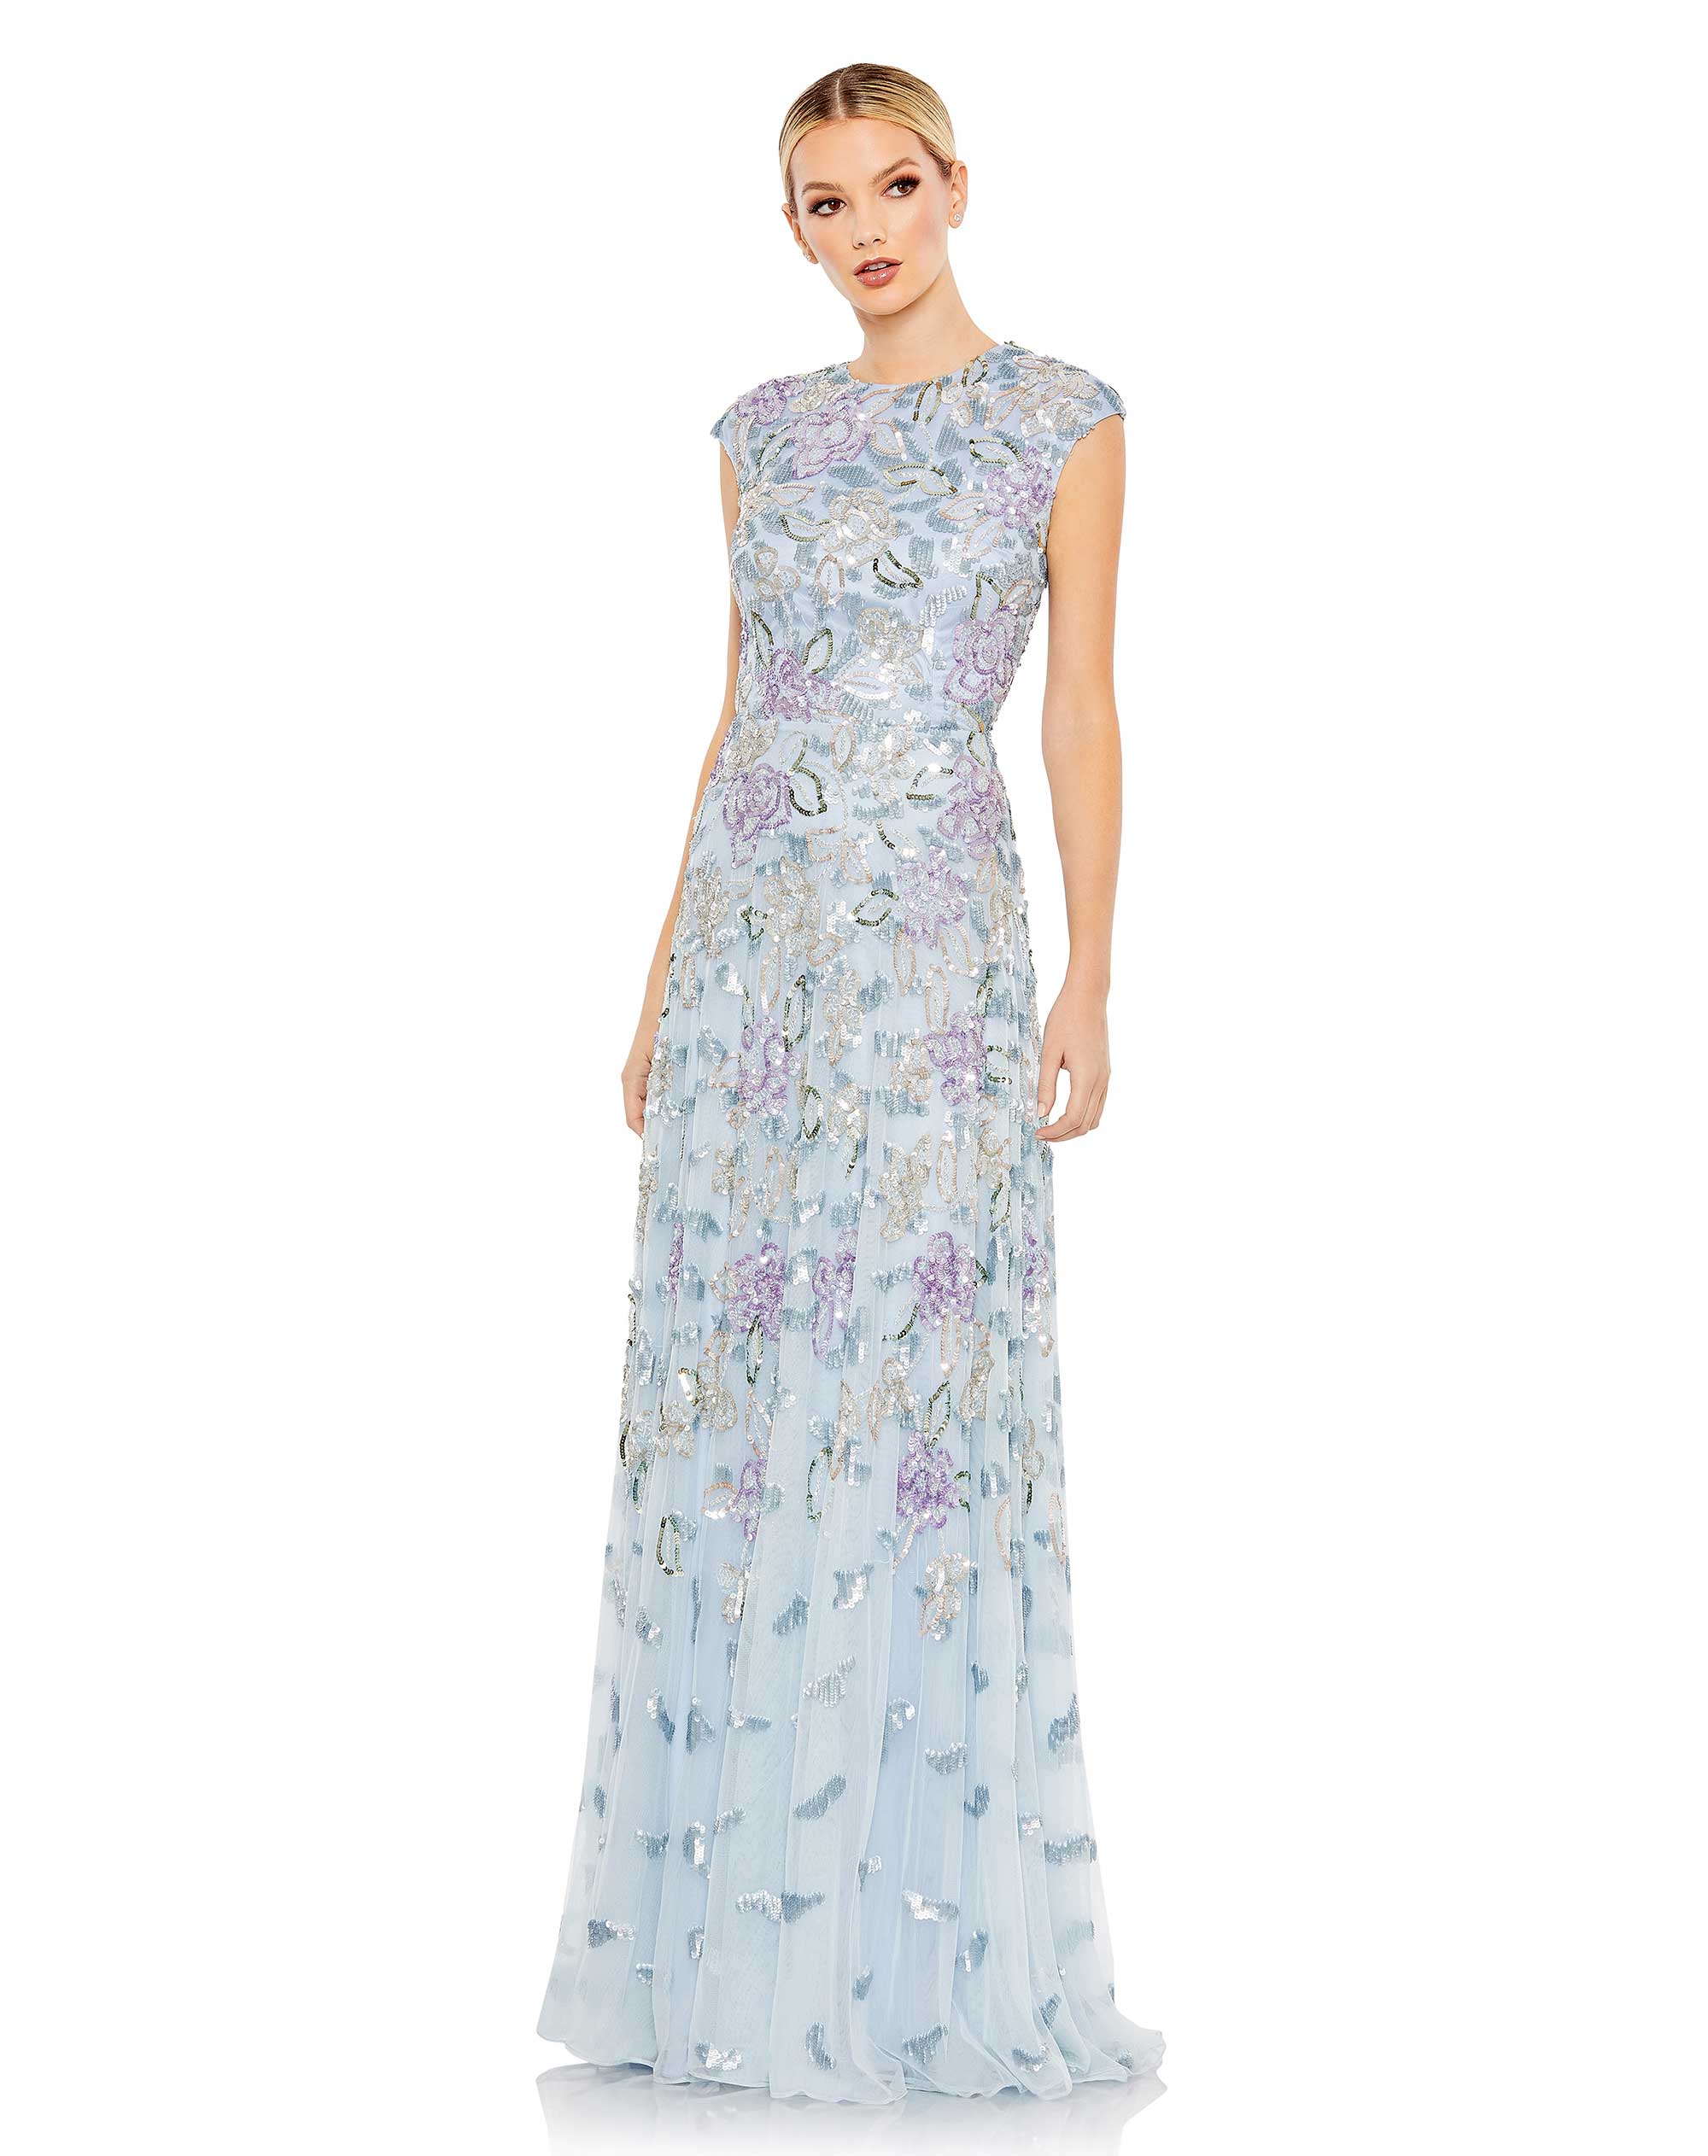 Sequined High Neck Cap Sleeve A Line Gown